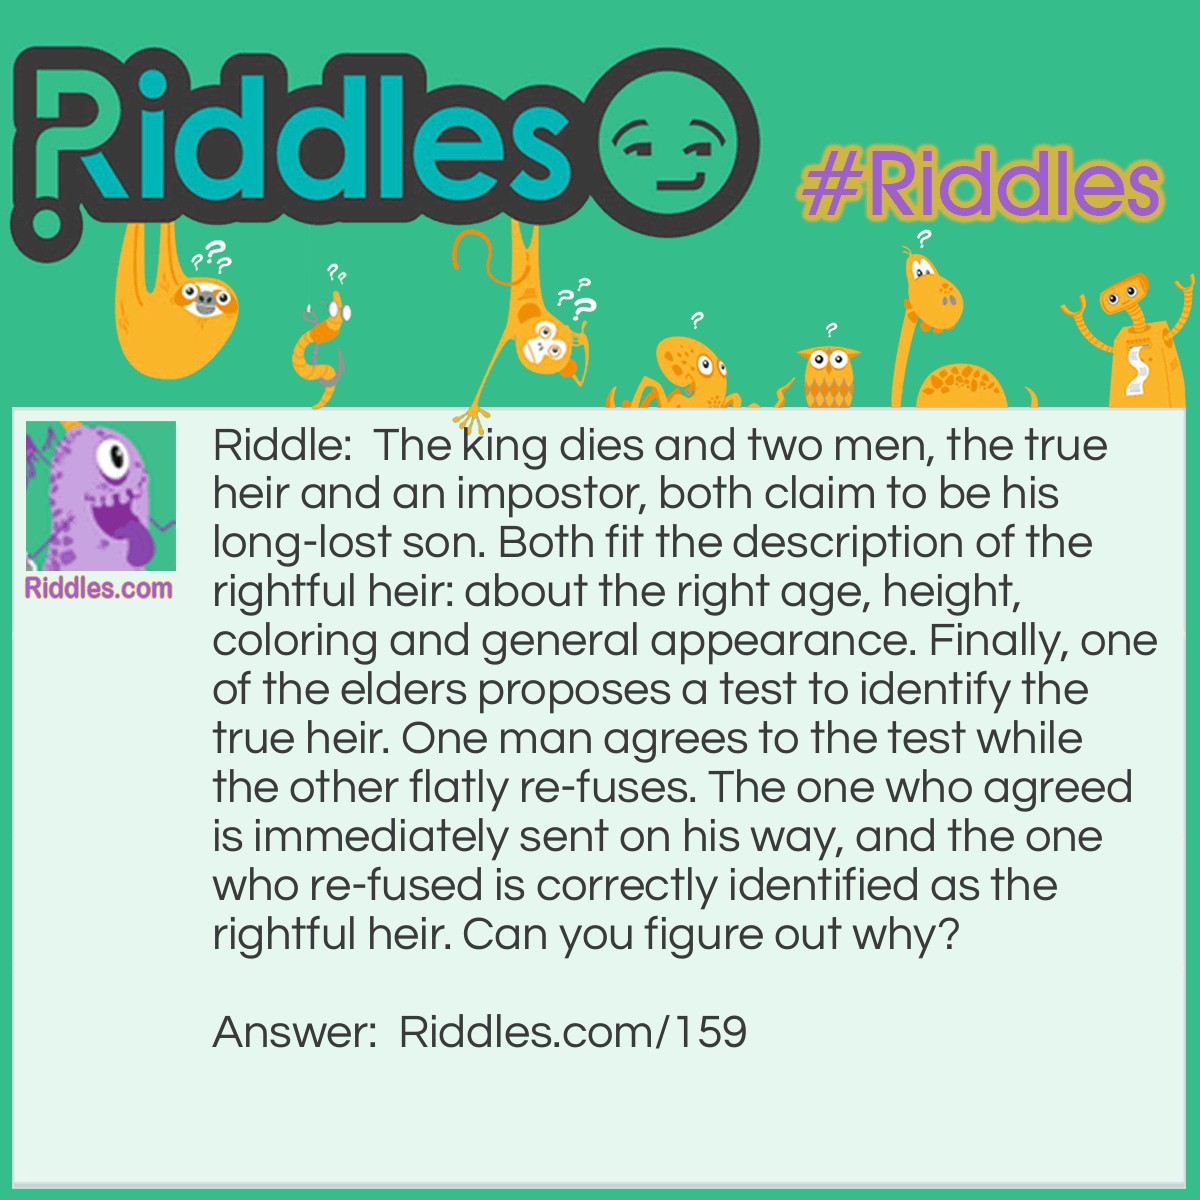 Riddle: The king dies and two men, the true heir and an impostor, both claim to be his long-lost son. Both fit the description of the rightful heir: about the right age, height, coloring and general appearance. Finally, one of the elders proposes a test to identify the true heir. One man agrees to the test while the other flatly re-fuses. The one who agreed is immediately sent on his way, and the one who re-fused is correctly identified as the rightful heir. Can you figure out why? Answer: The test was a blood test. The elder remembered that the true prince was a hemophiliac.